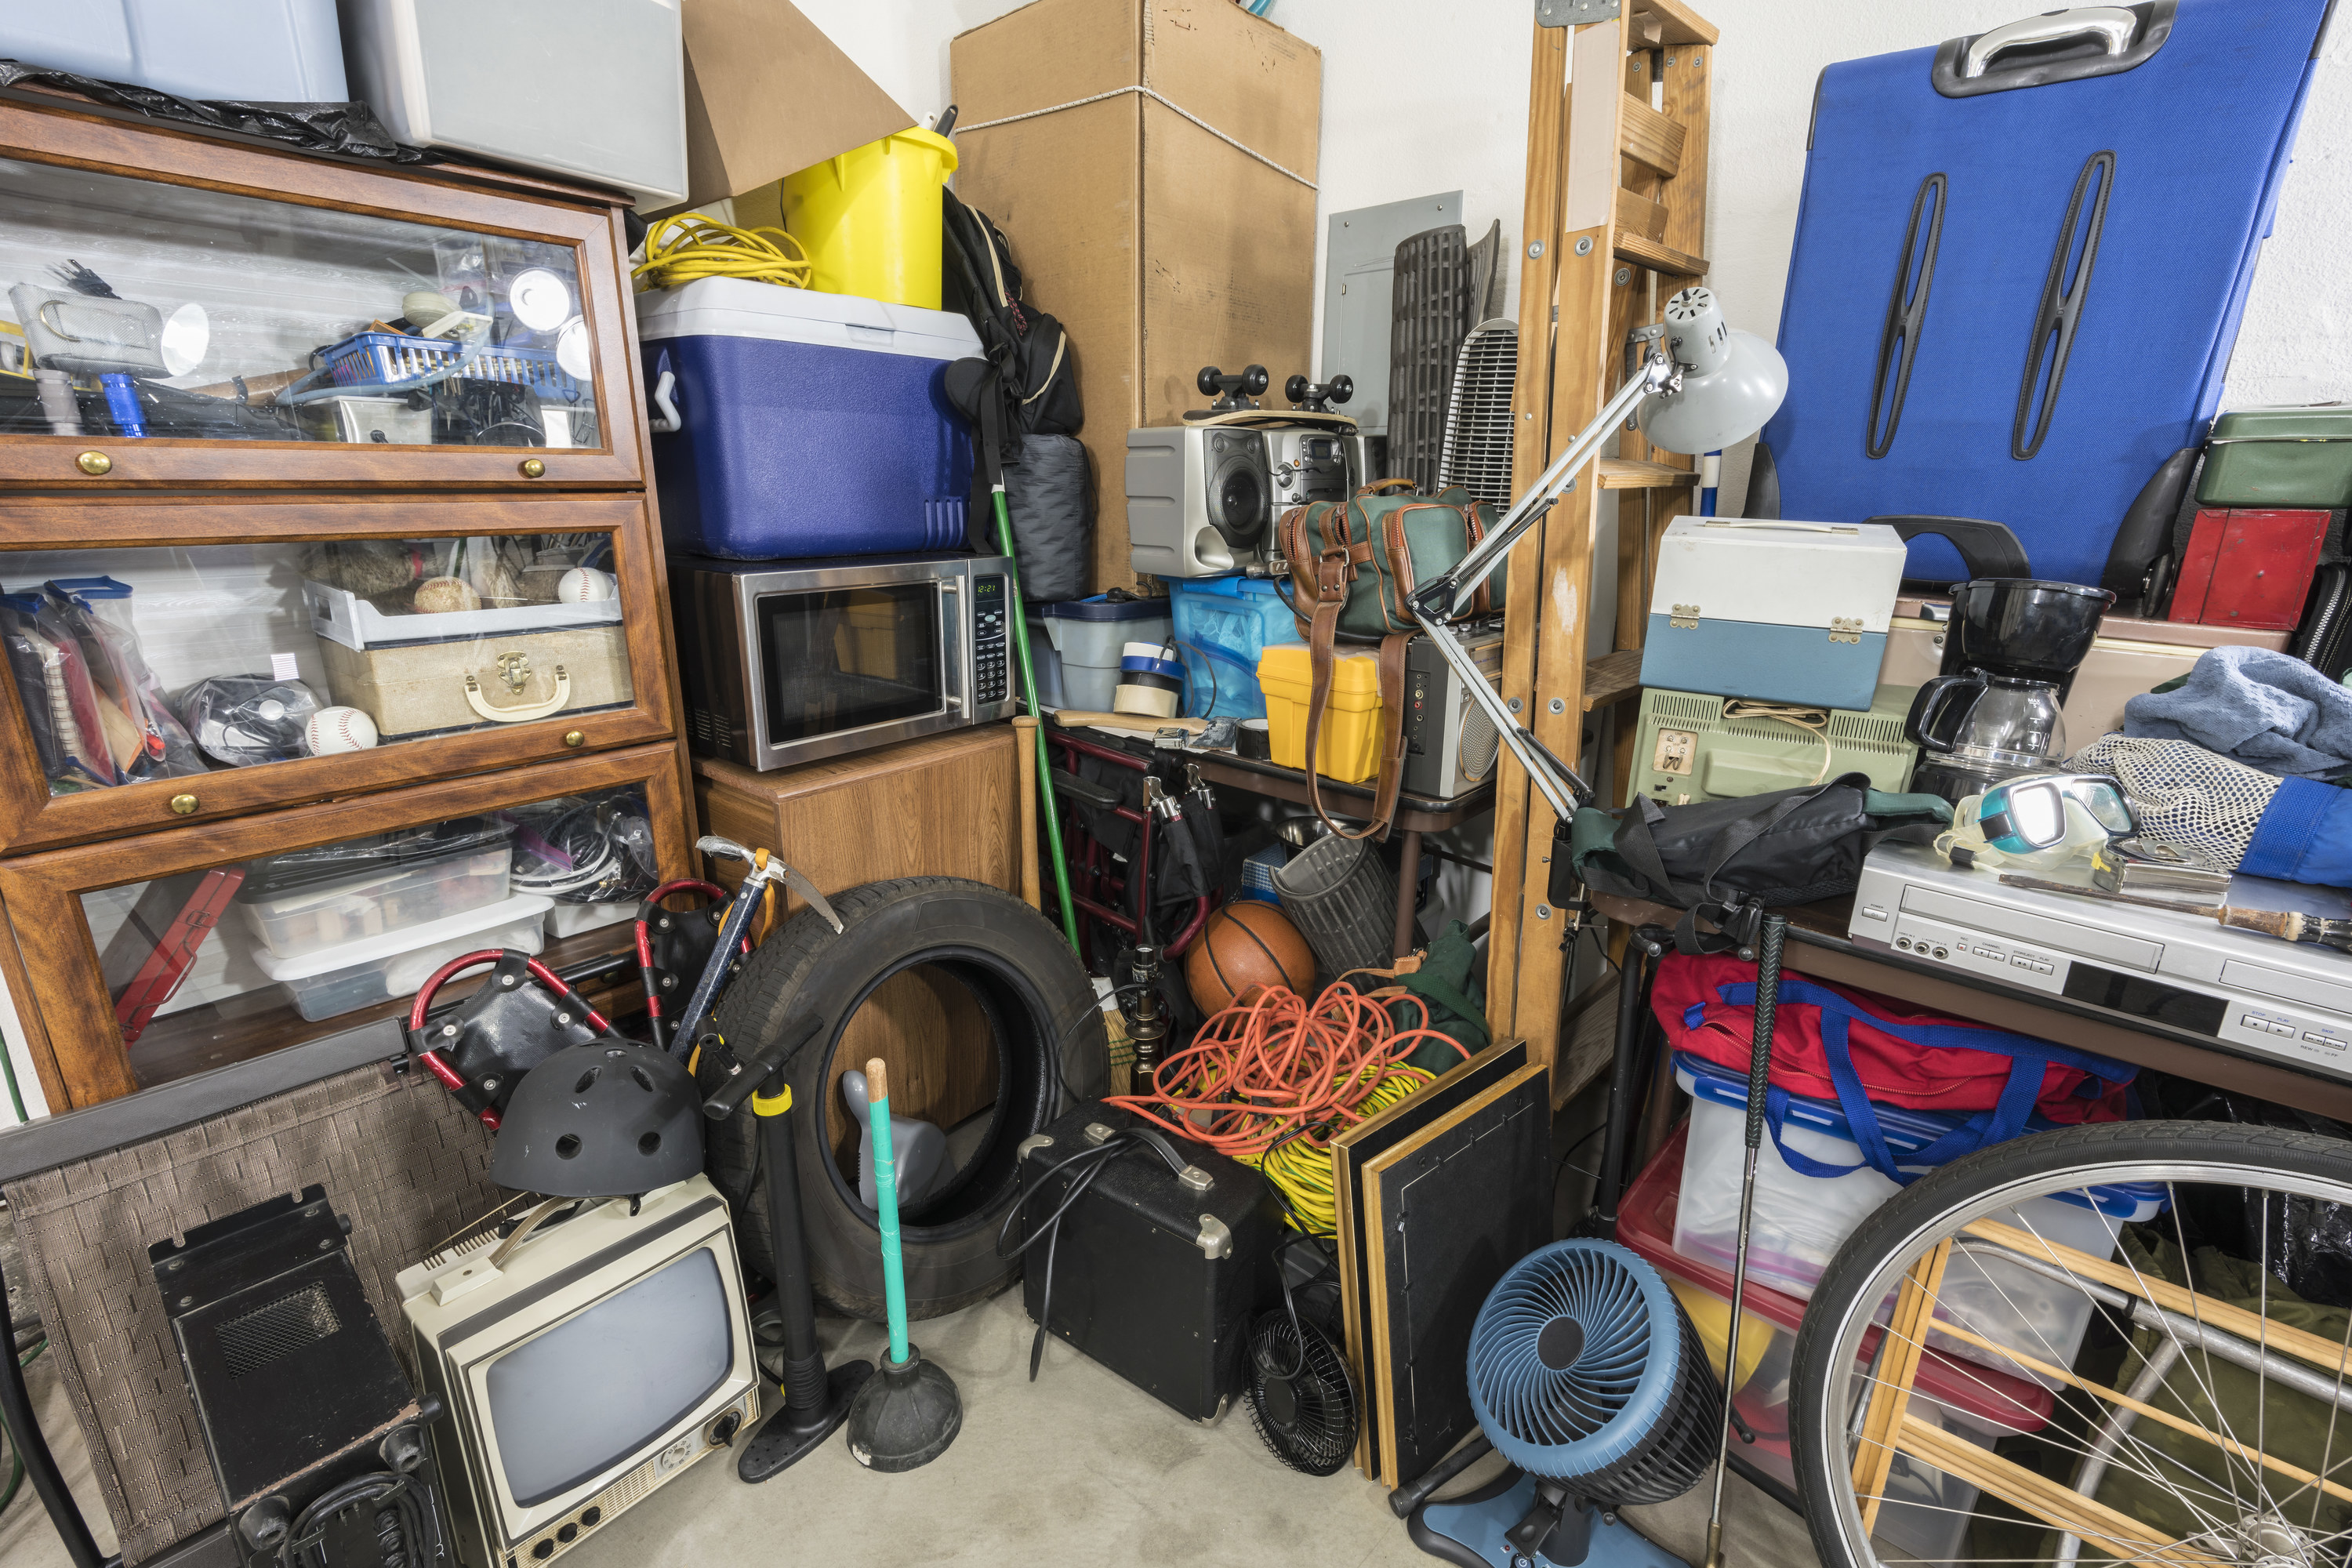 A cluttered room